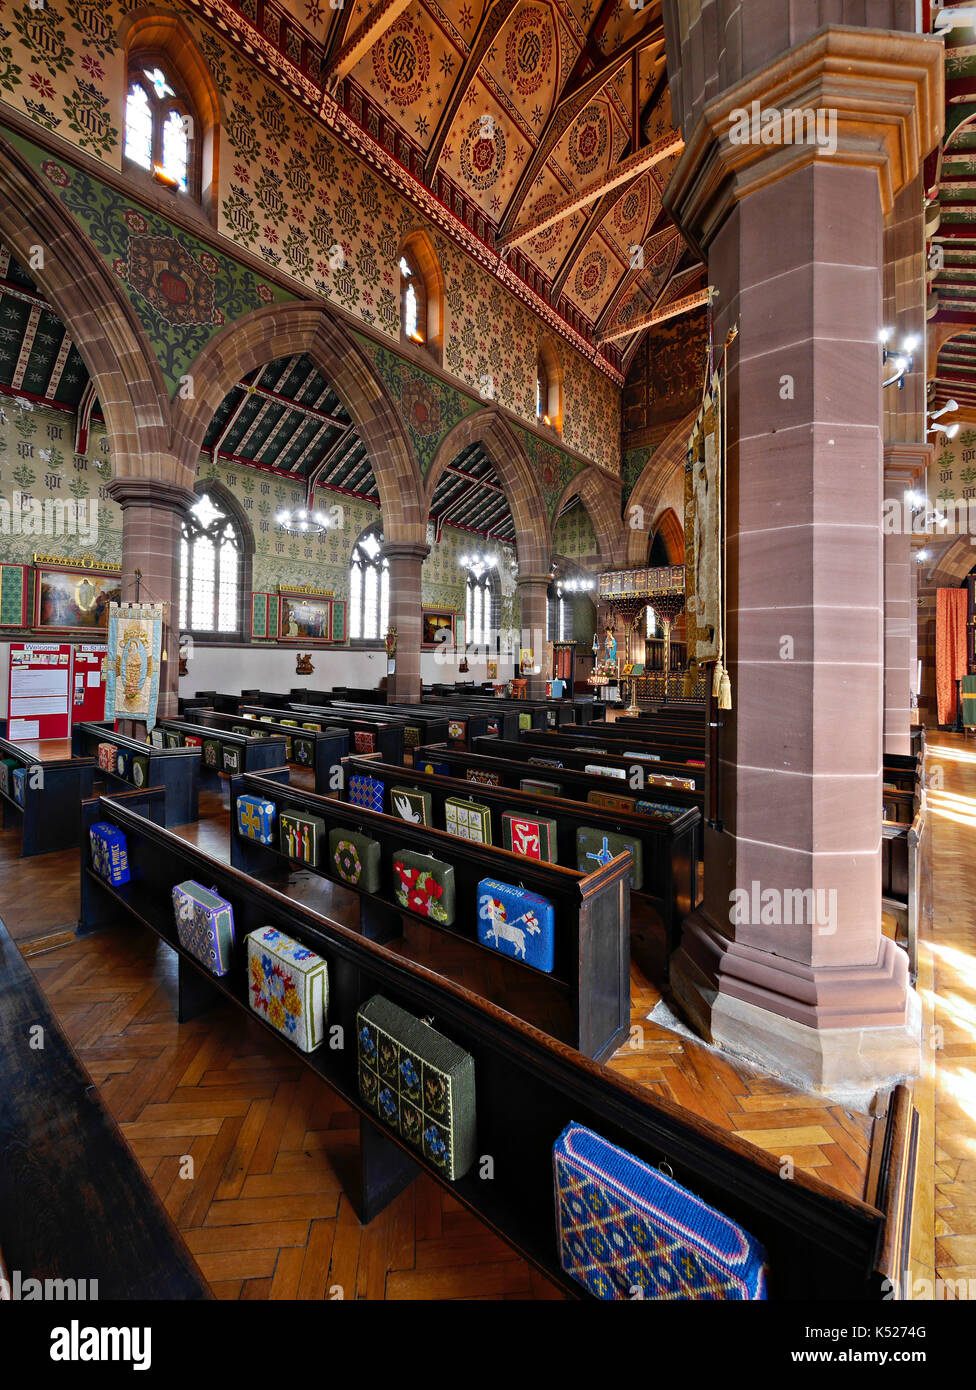 Interior St John the Baptist, Tuebrook, Liverpool, Grade l Listed Anglican Church 1867-1870 by George Bodley. Richly decorated Anglo-Catholic church. Stock Photo